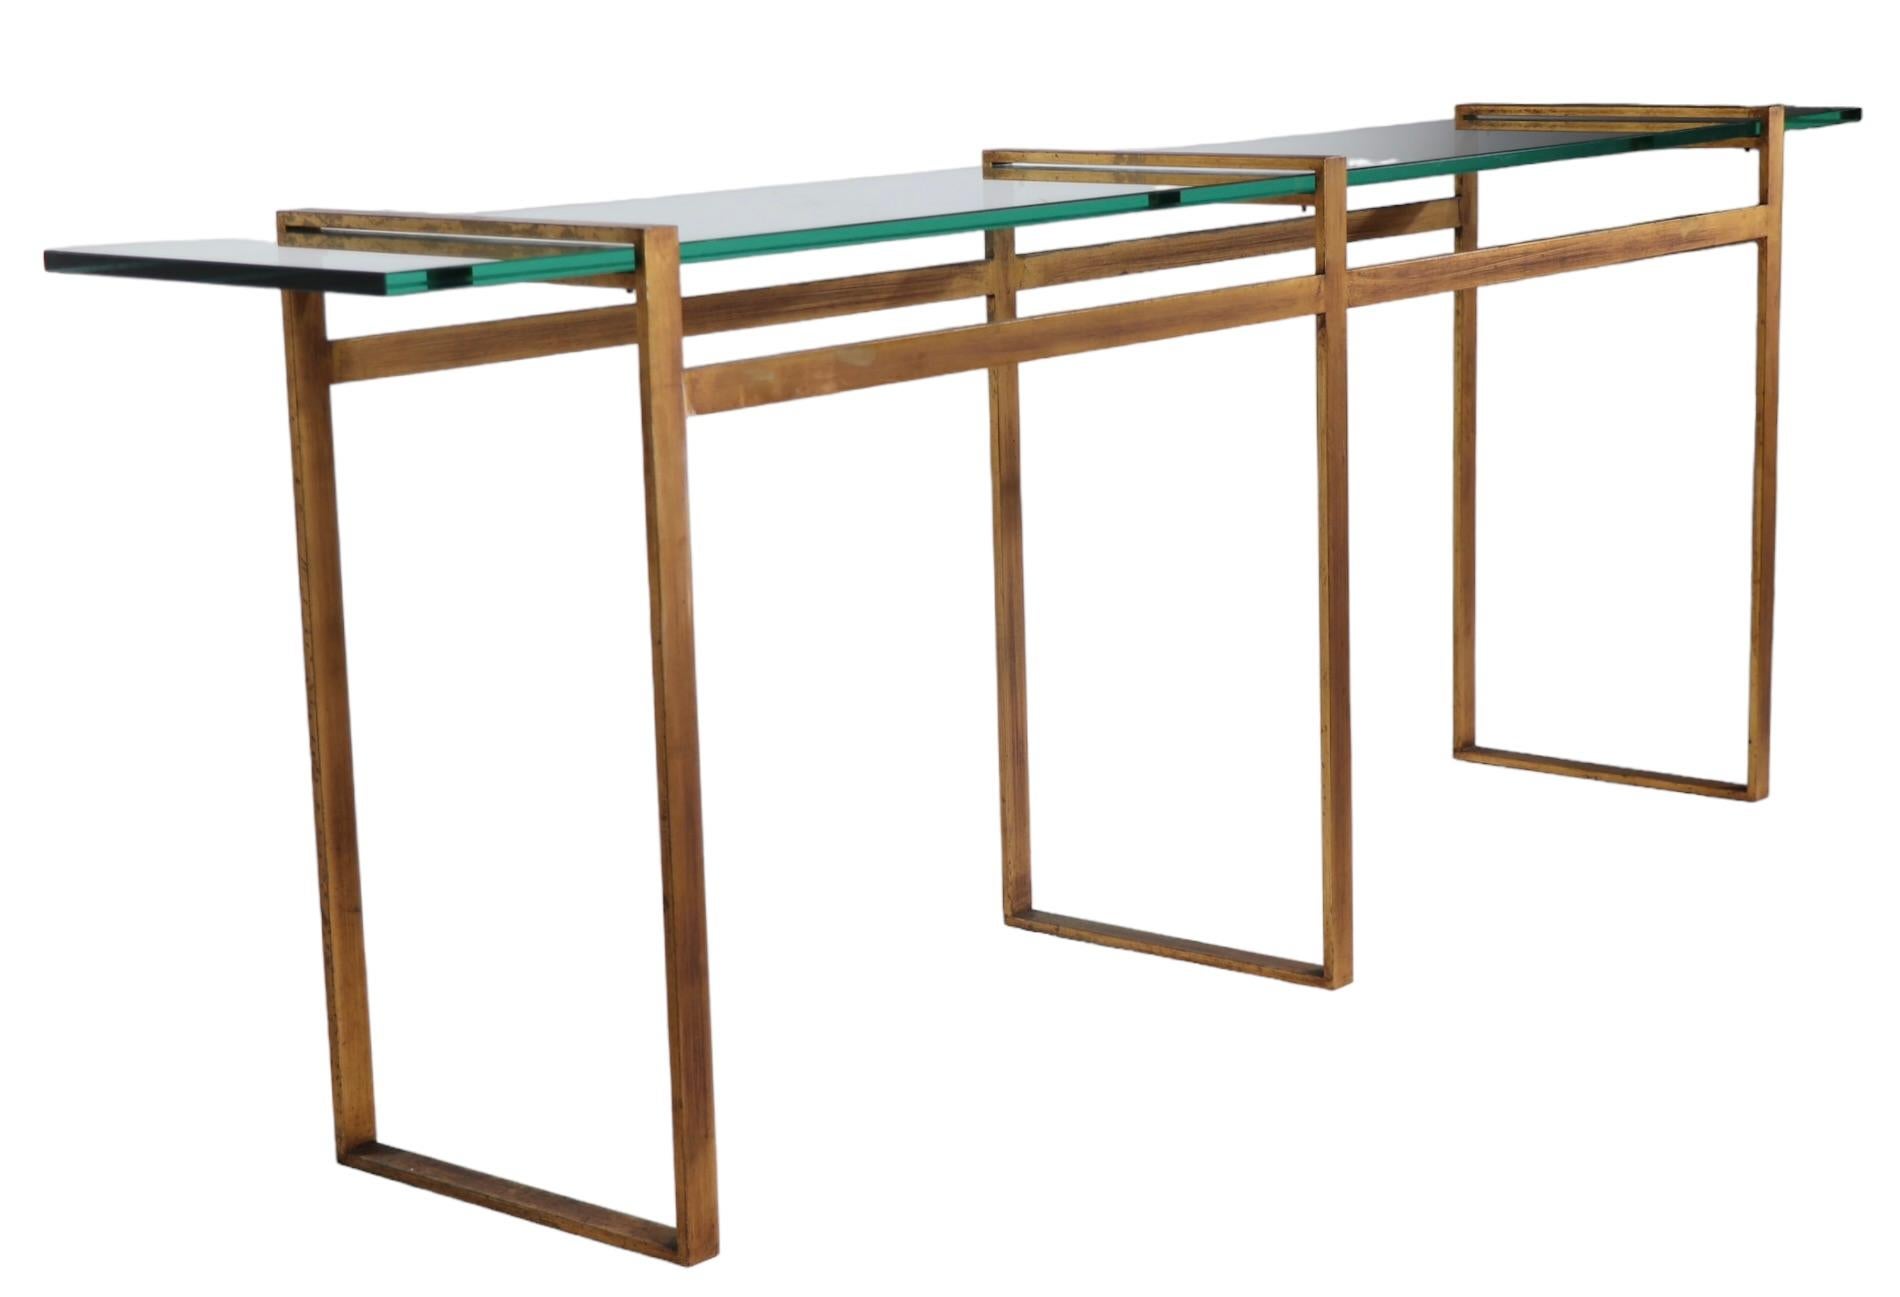 Large Modernist Metal and Glass Console in Faux Gilt Finish c 1970’s For Sale 2